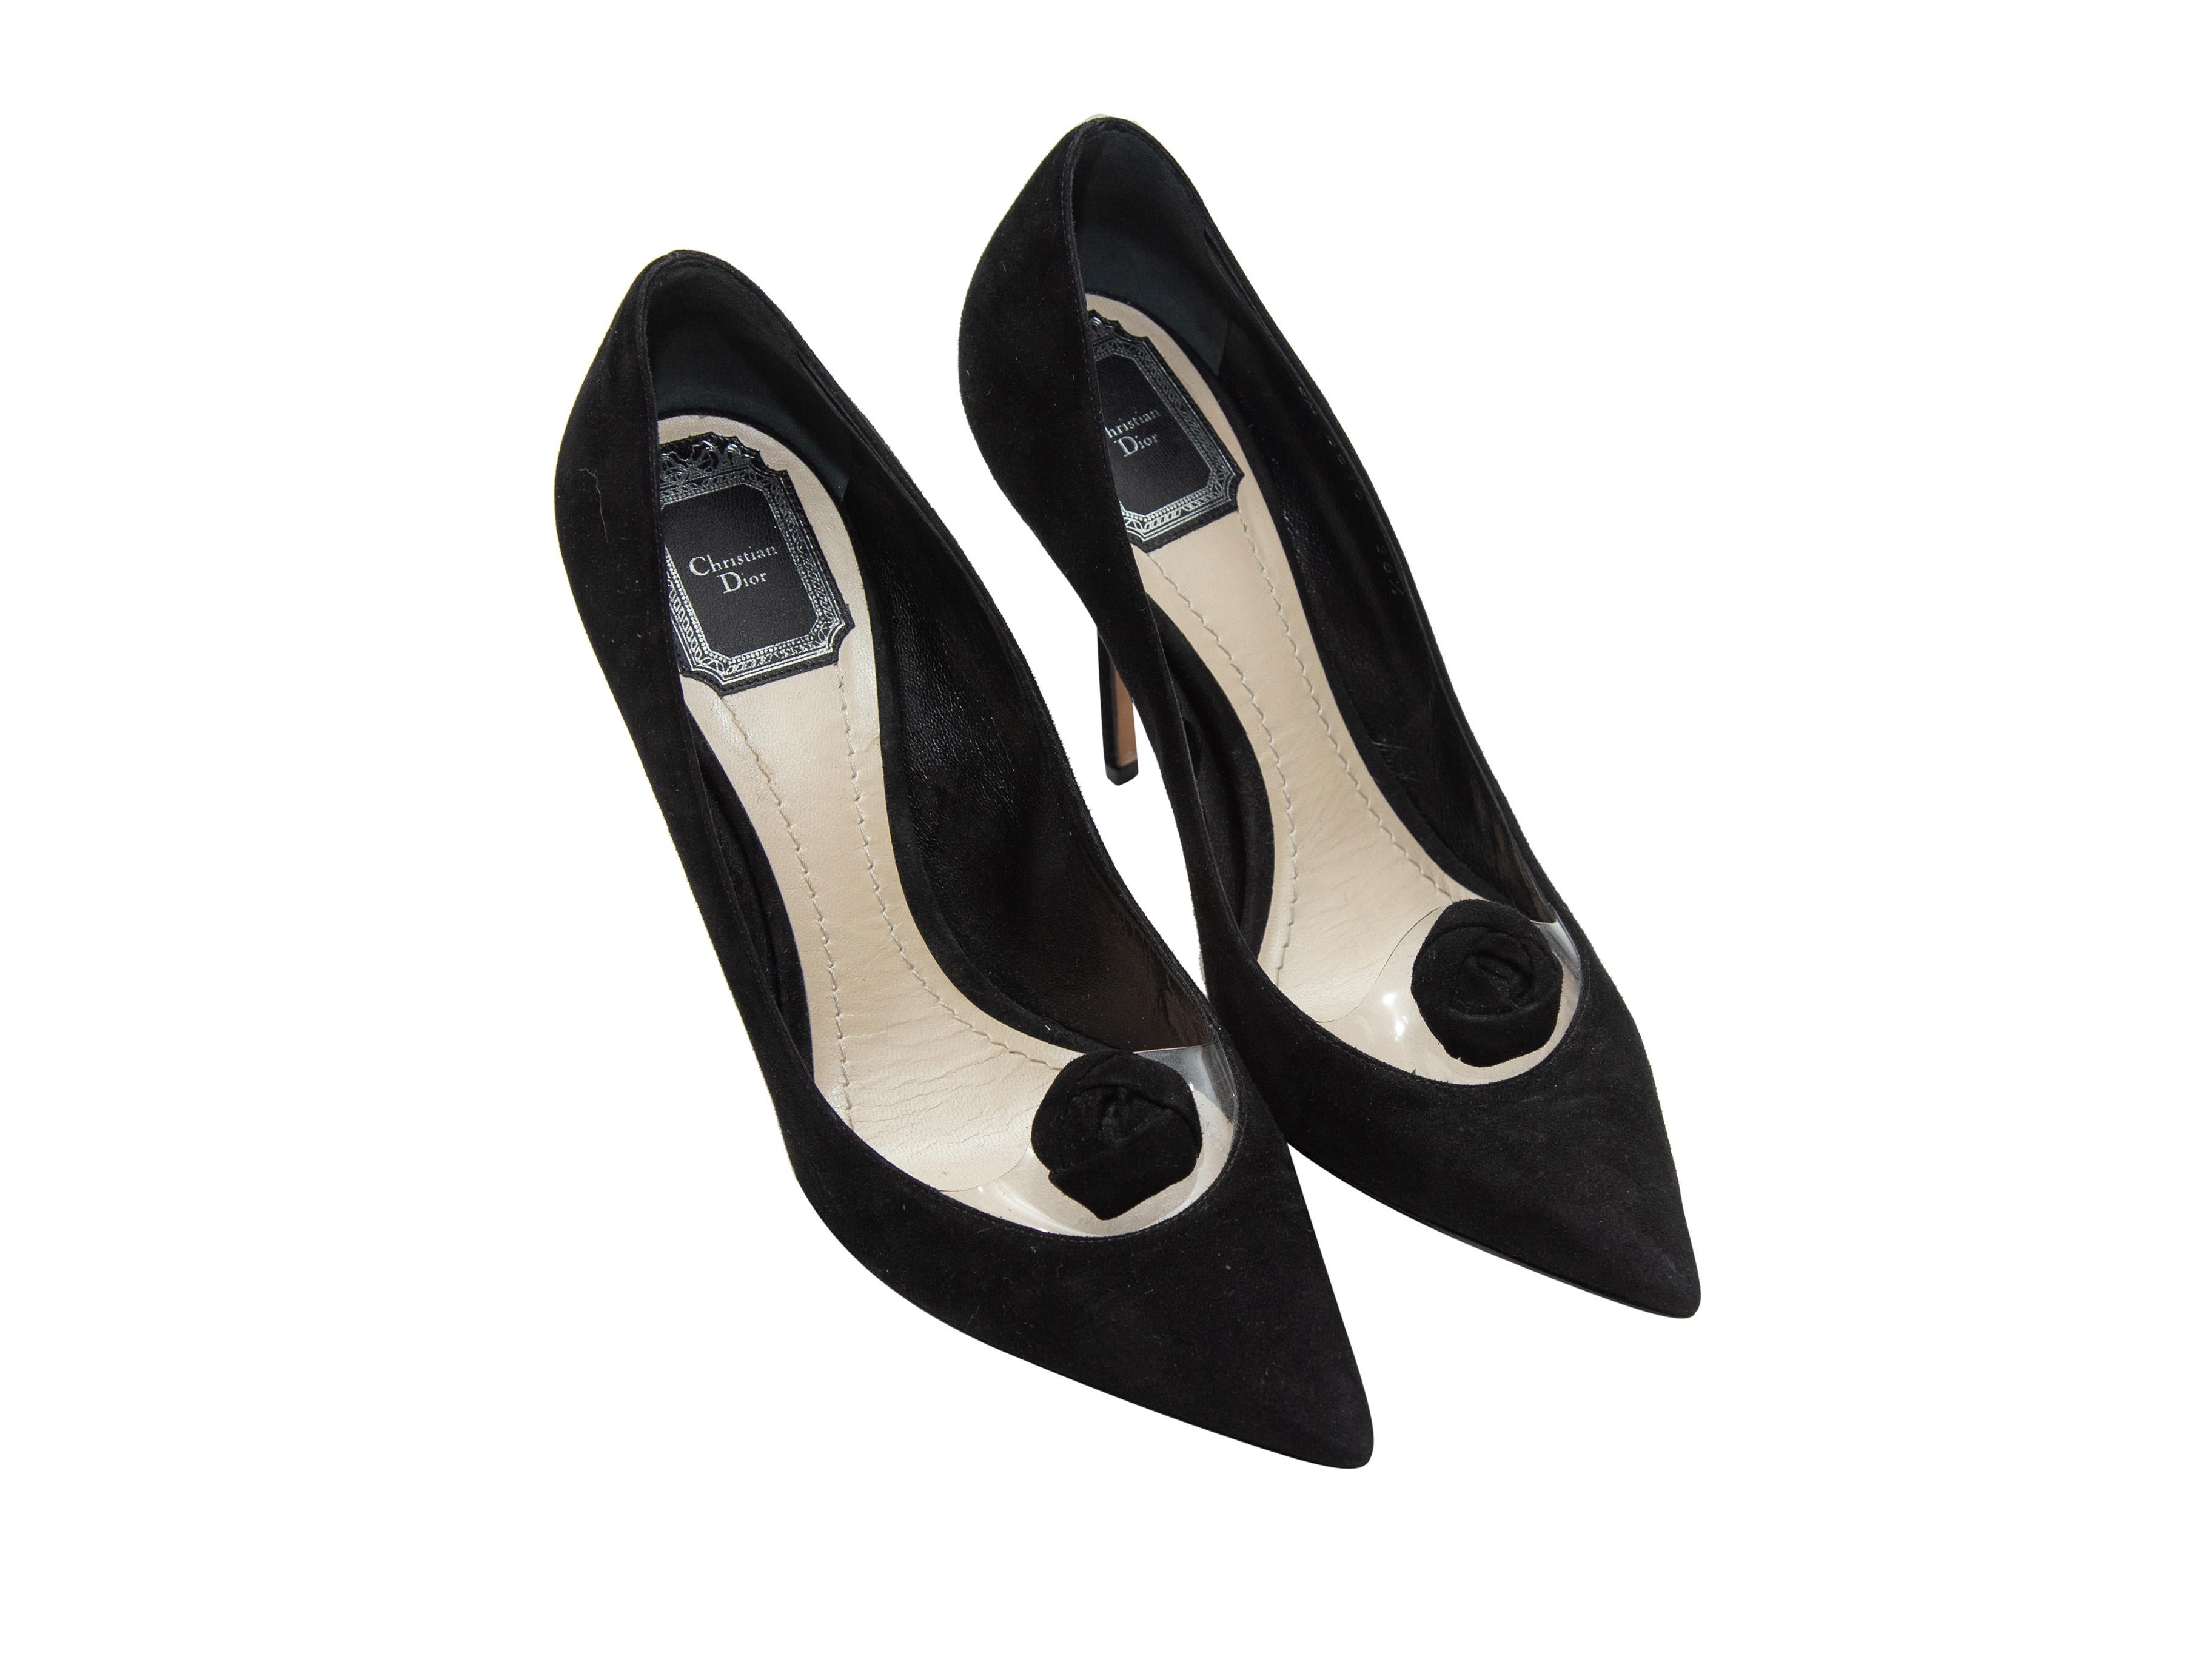 Product details: Black suede pointed-toe pumps by Christian Dior. Vinyl and rosette detailing at tops. Designer size 38.5. 4